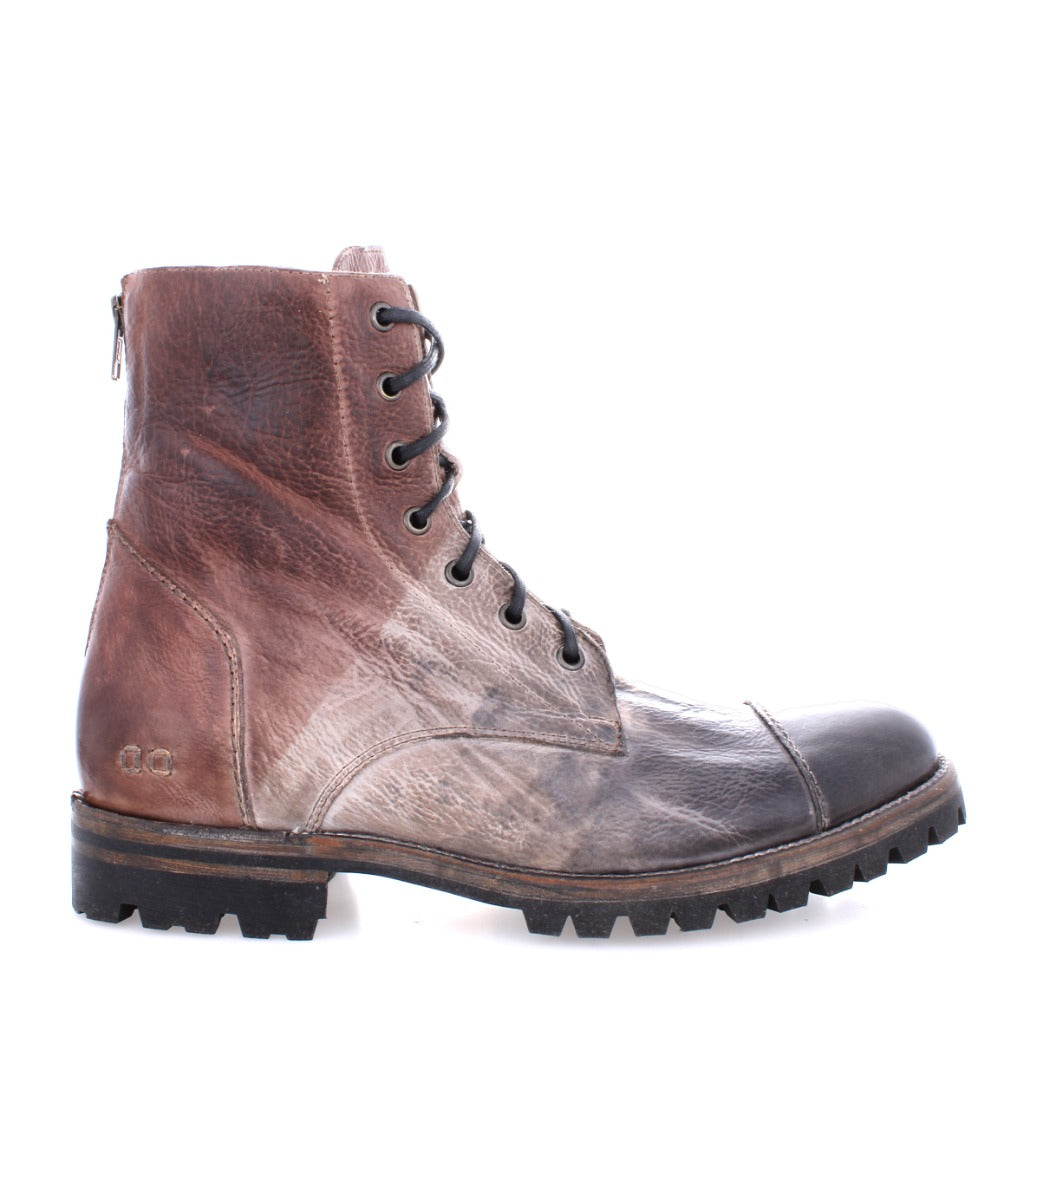 A pair of Bed Stu Protege Trek boots with a brown leather sole.